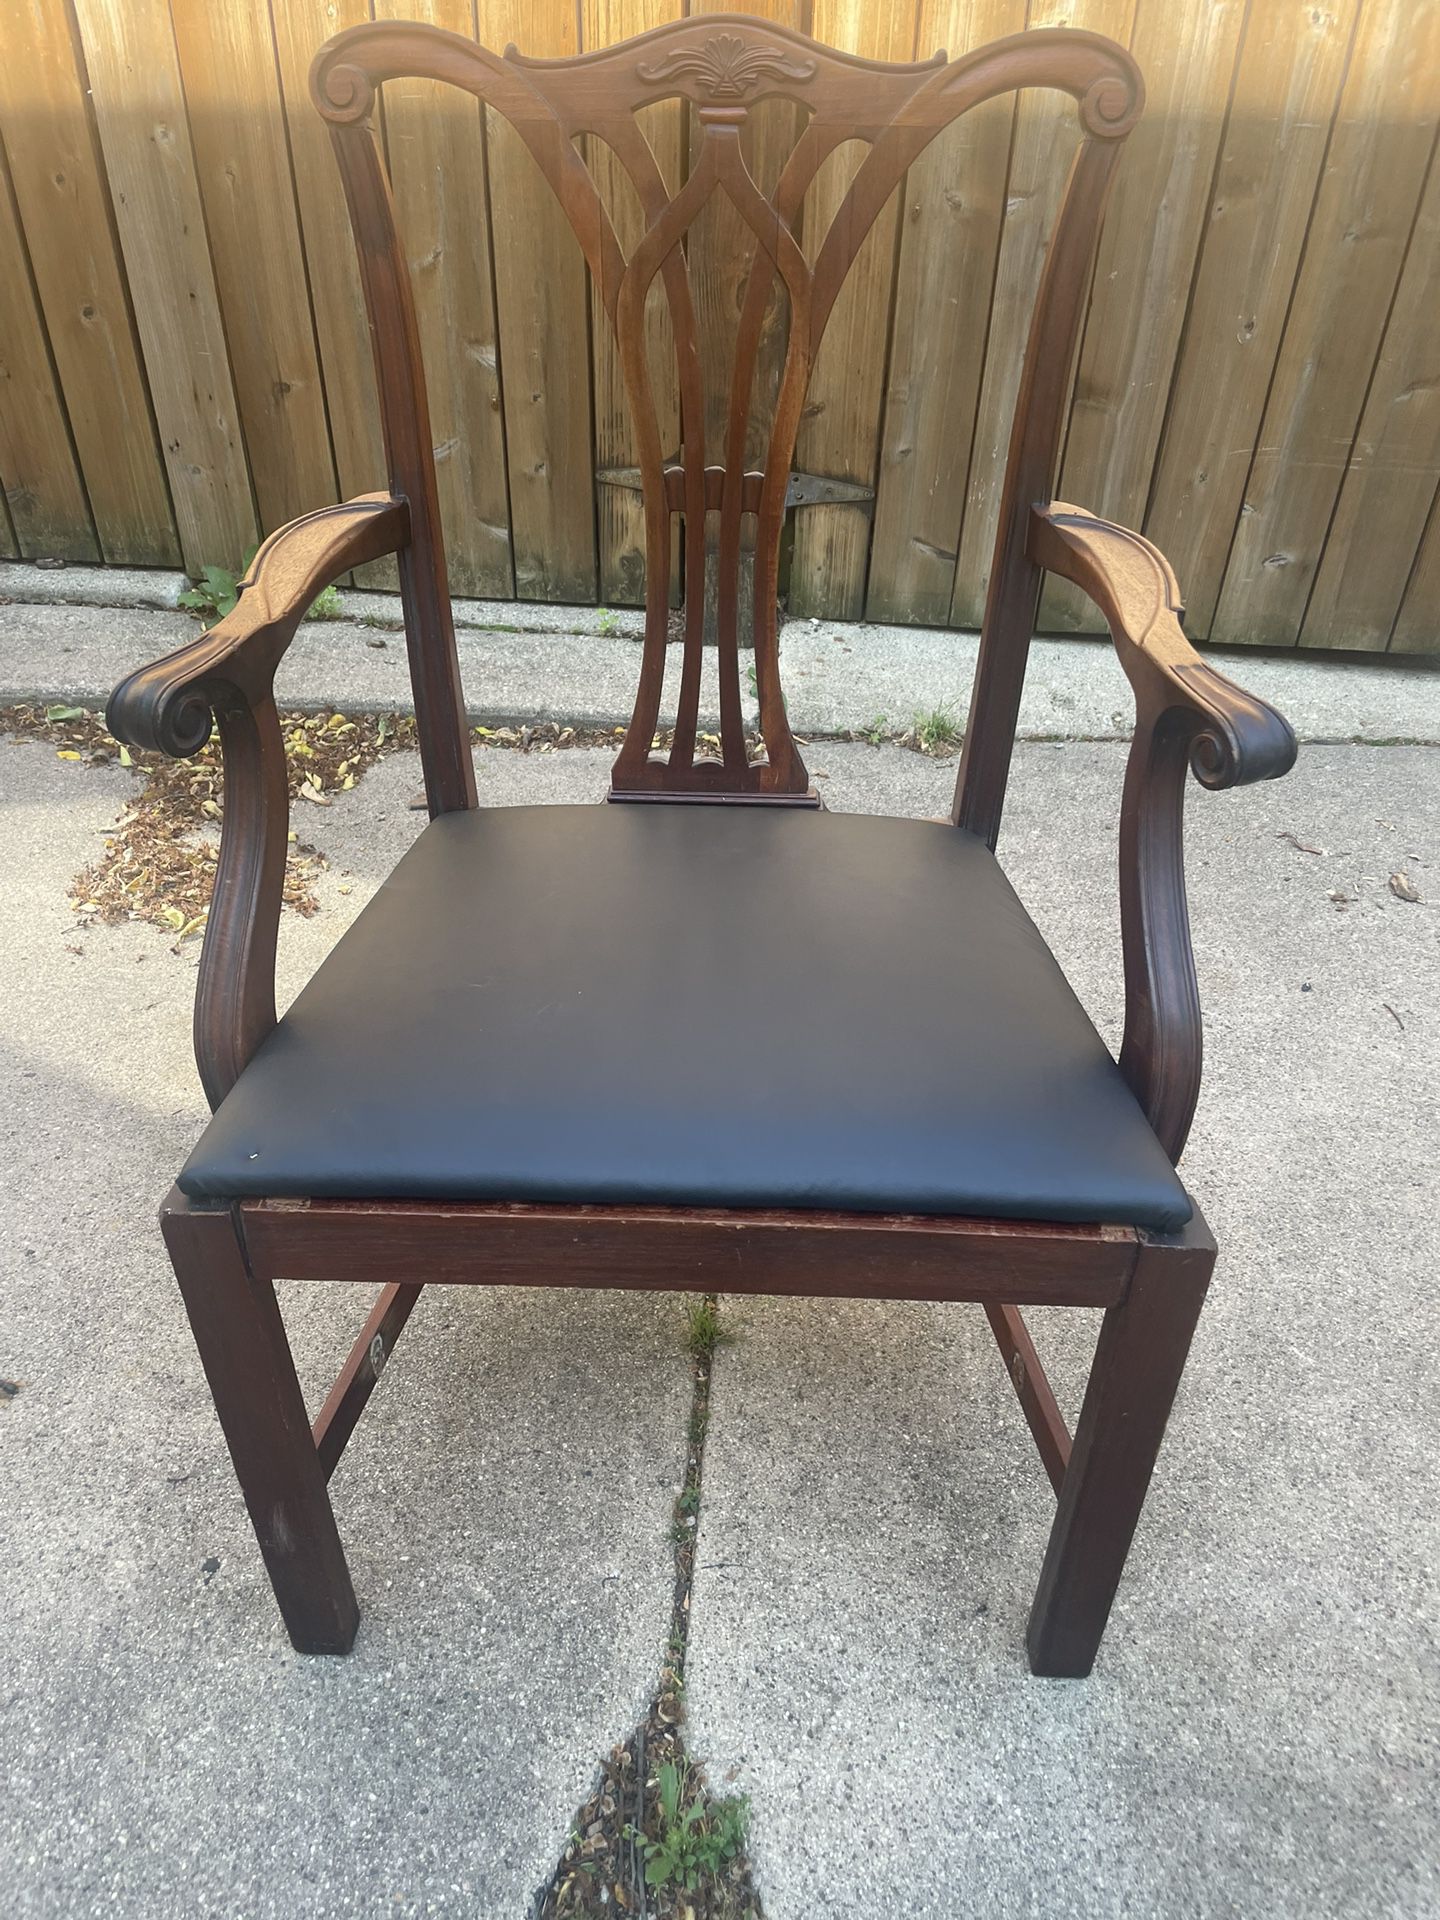 Antique Wooden Chair with Padded Seat , 24 wide, 39 high back, seat at 19 high, $25